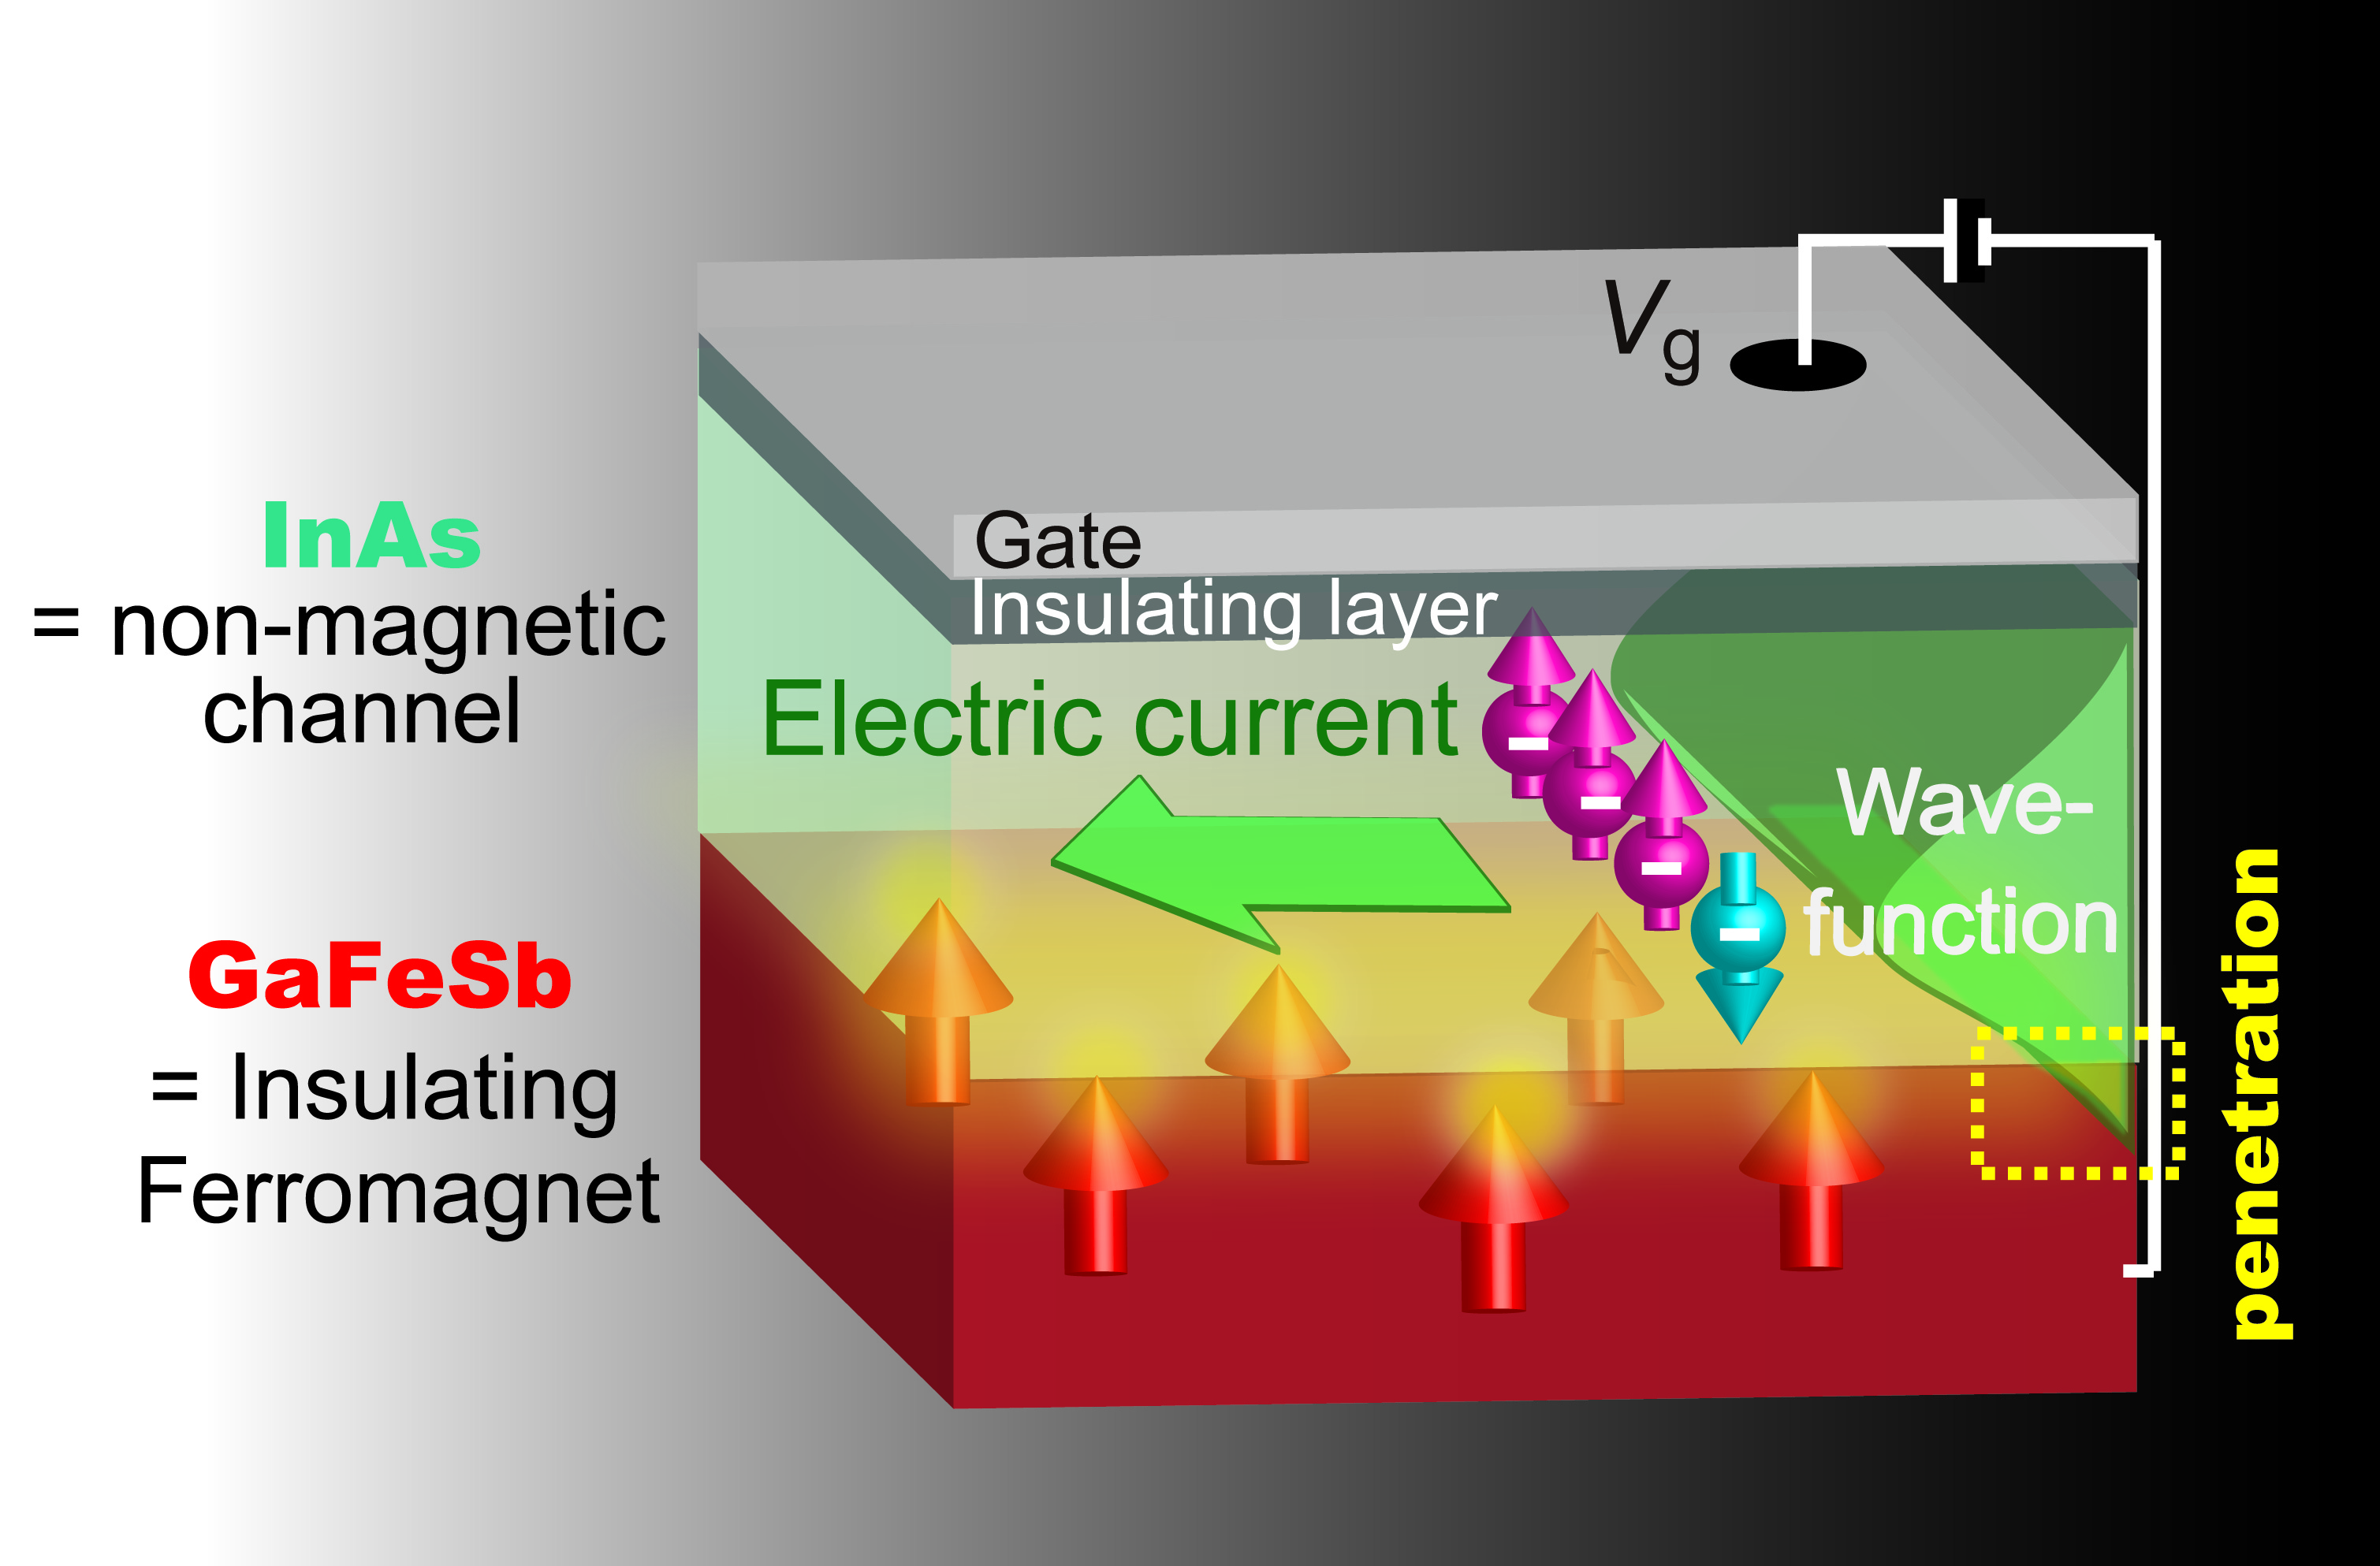 Giant gate-controlled proximity magnetoresistance in semiconductor-based ferromagnetic GaFeSb / InAs nonmagnetic semiconductor bilayers